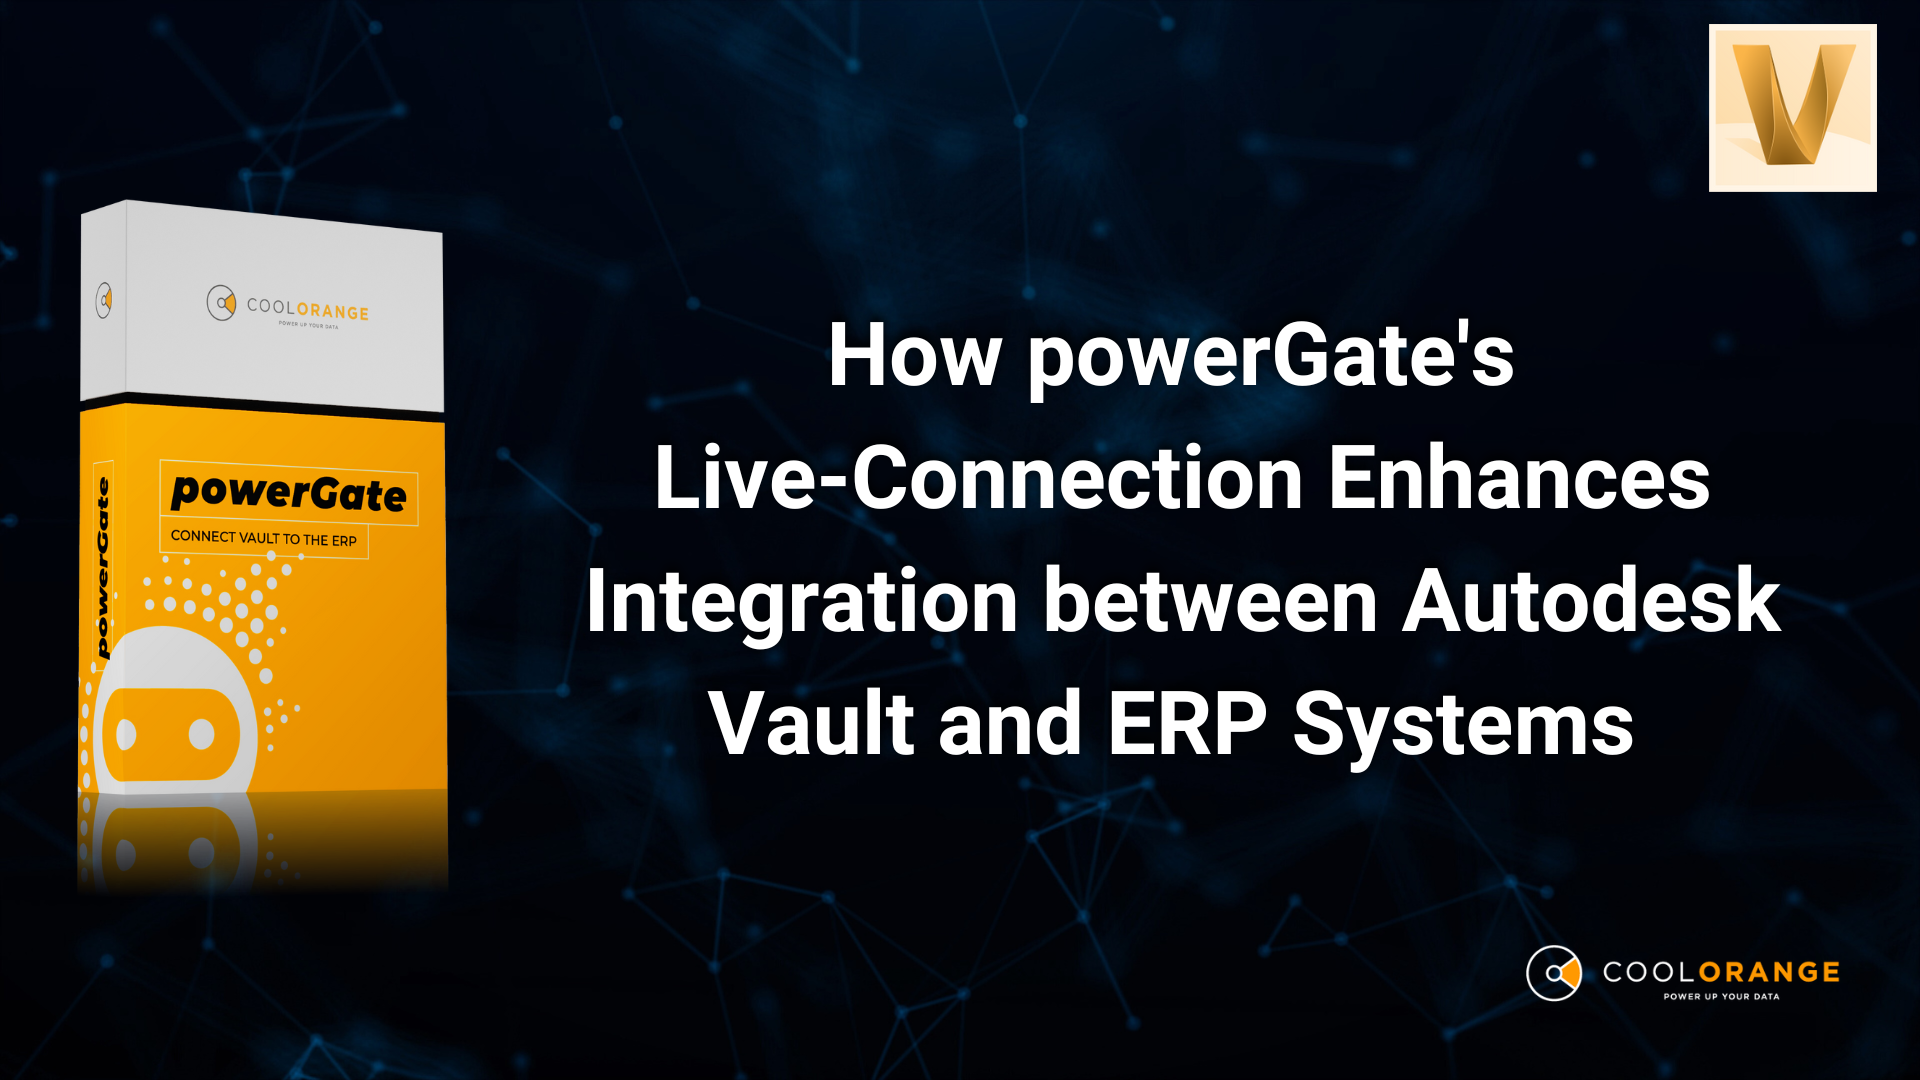 How powerGate's Live-Connection Enhances Integration between Autodesk Vault and ERP Systems